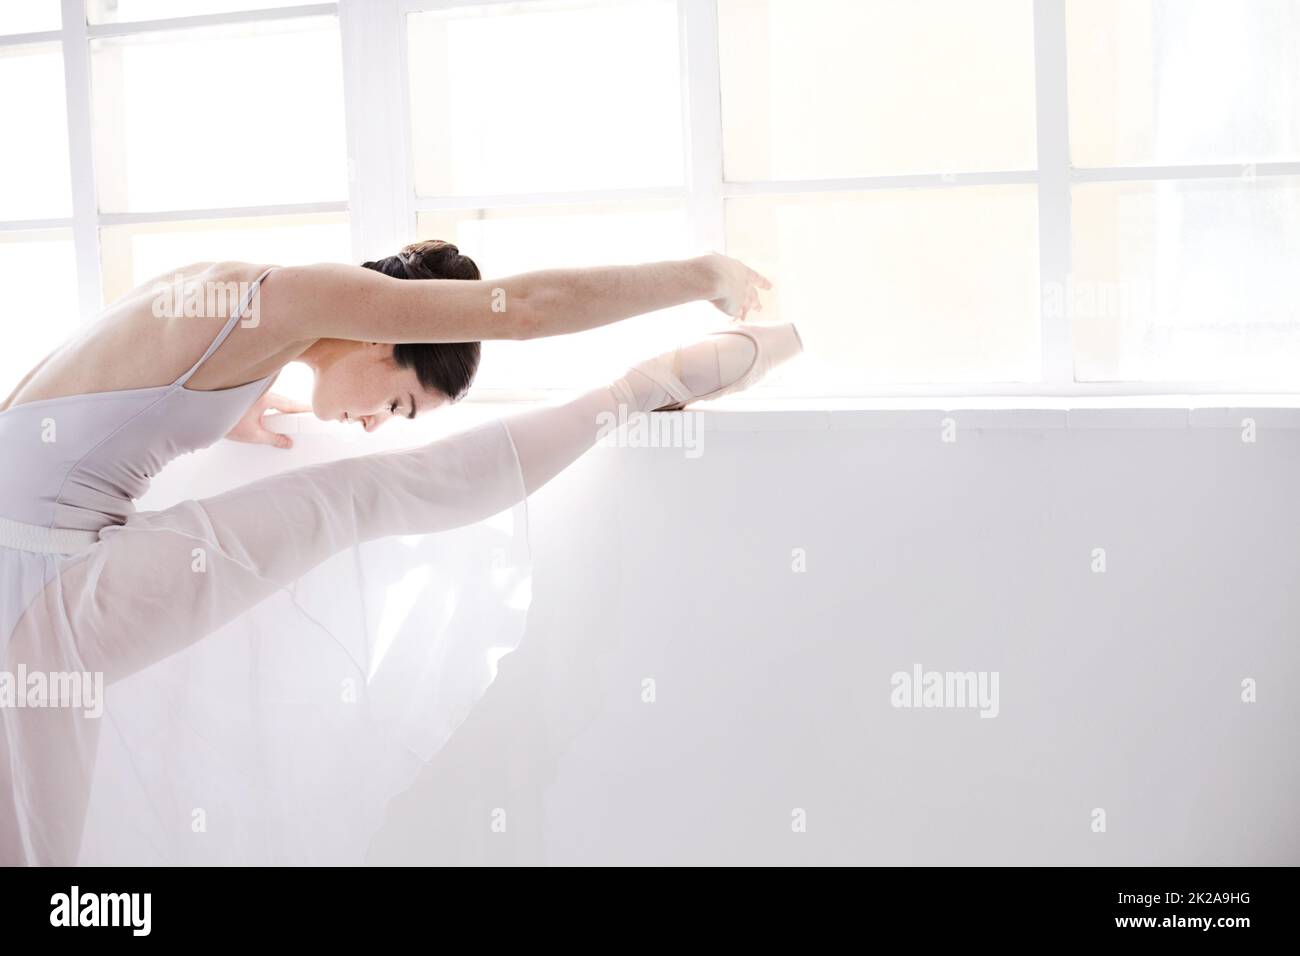 Grace in movement. Supple young ballerina stretching alongside a white wall. Stock Photo